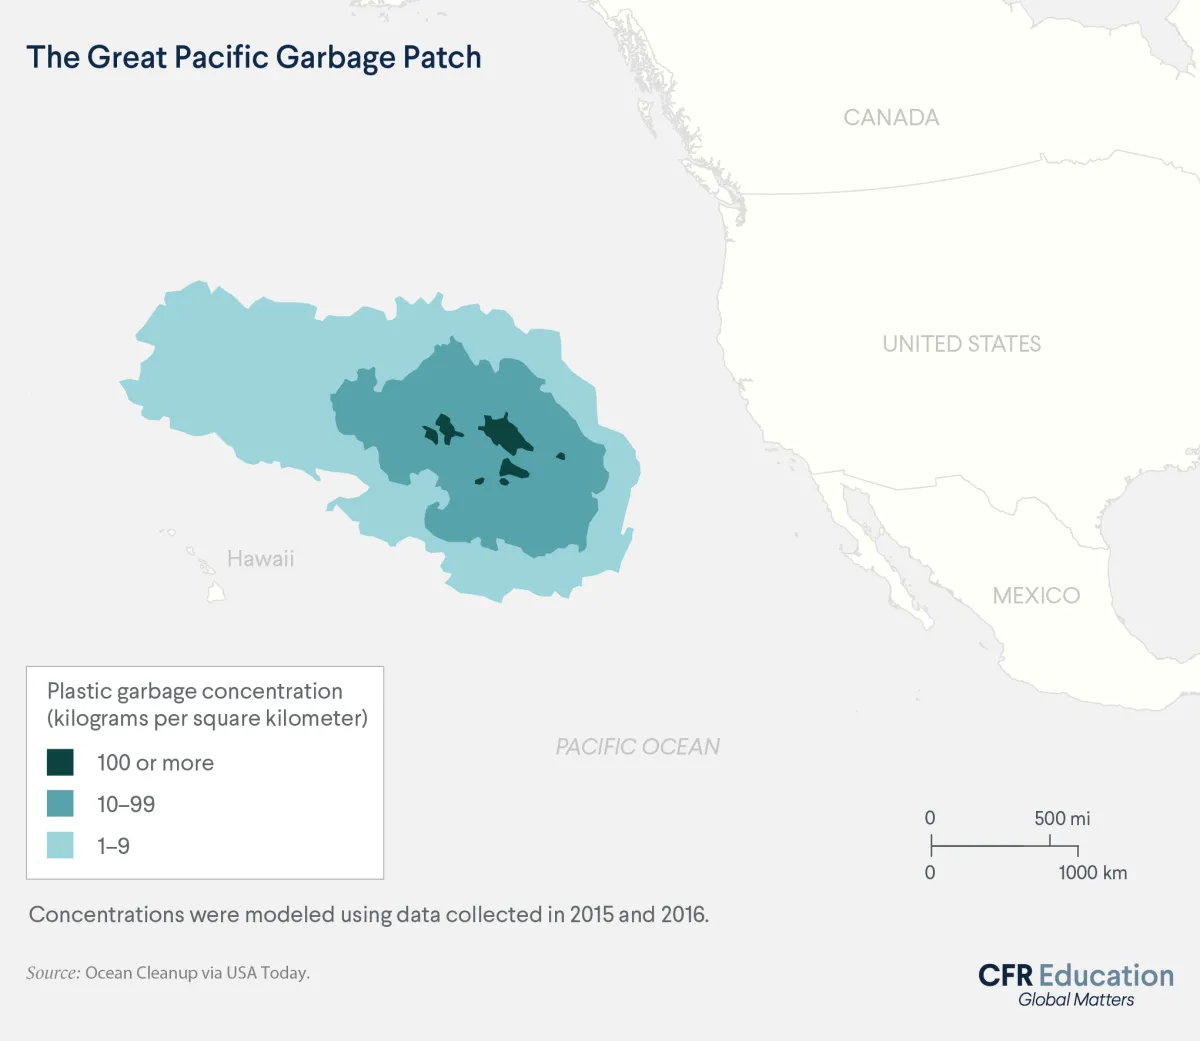  Map of the Great Pacific Garbage Patch, which covers a wide swatch of the Pacific Ocean near Hawaii (based on models using data collected in 2015 and 2016). For more info contact us at cfr_education@cfr.org.